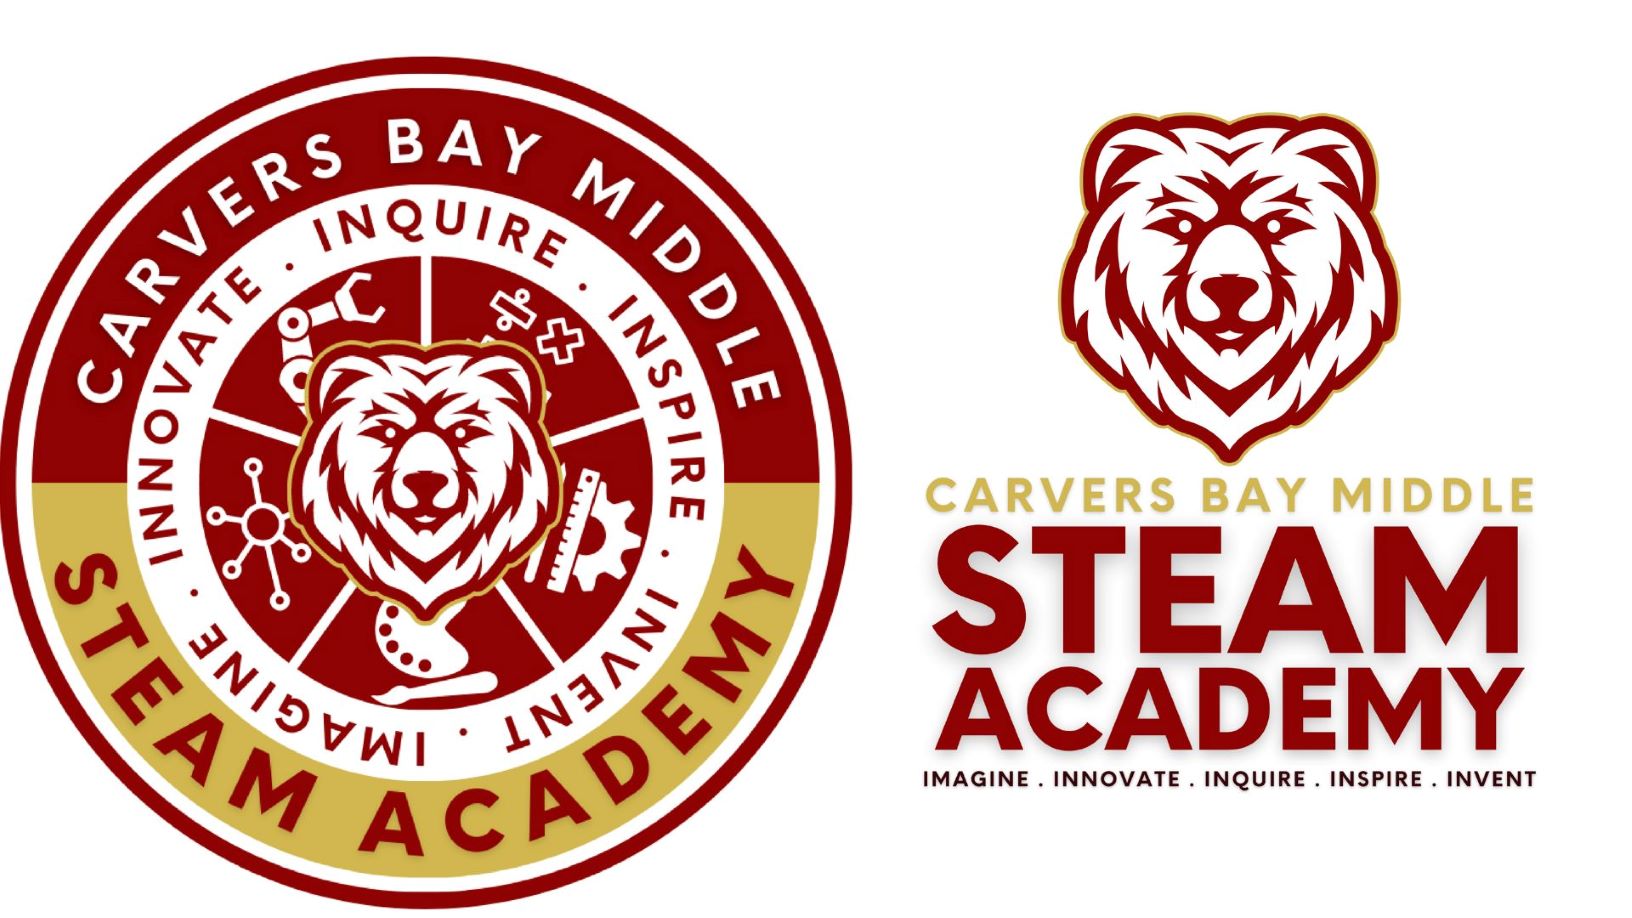 Carvers Bay Middle STEAM Academy slogan with the following words:  Imagine, Innovate, Invent, Inquire, and Inspire.  The graphic also contains a clipart image of the school's mascot, a bear's head .